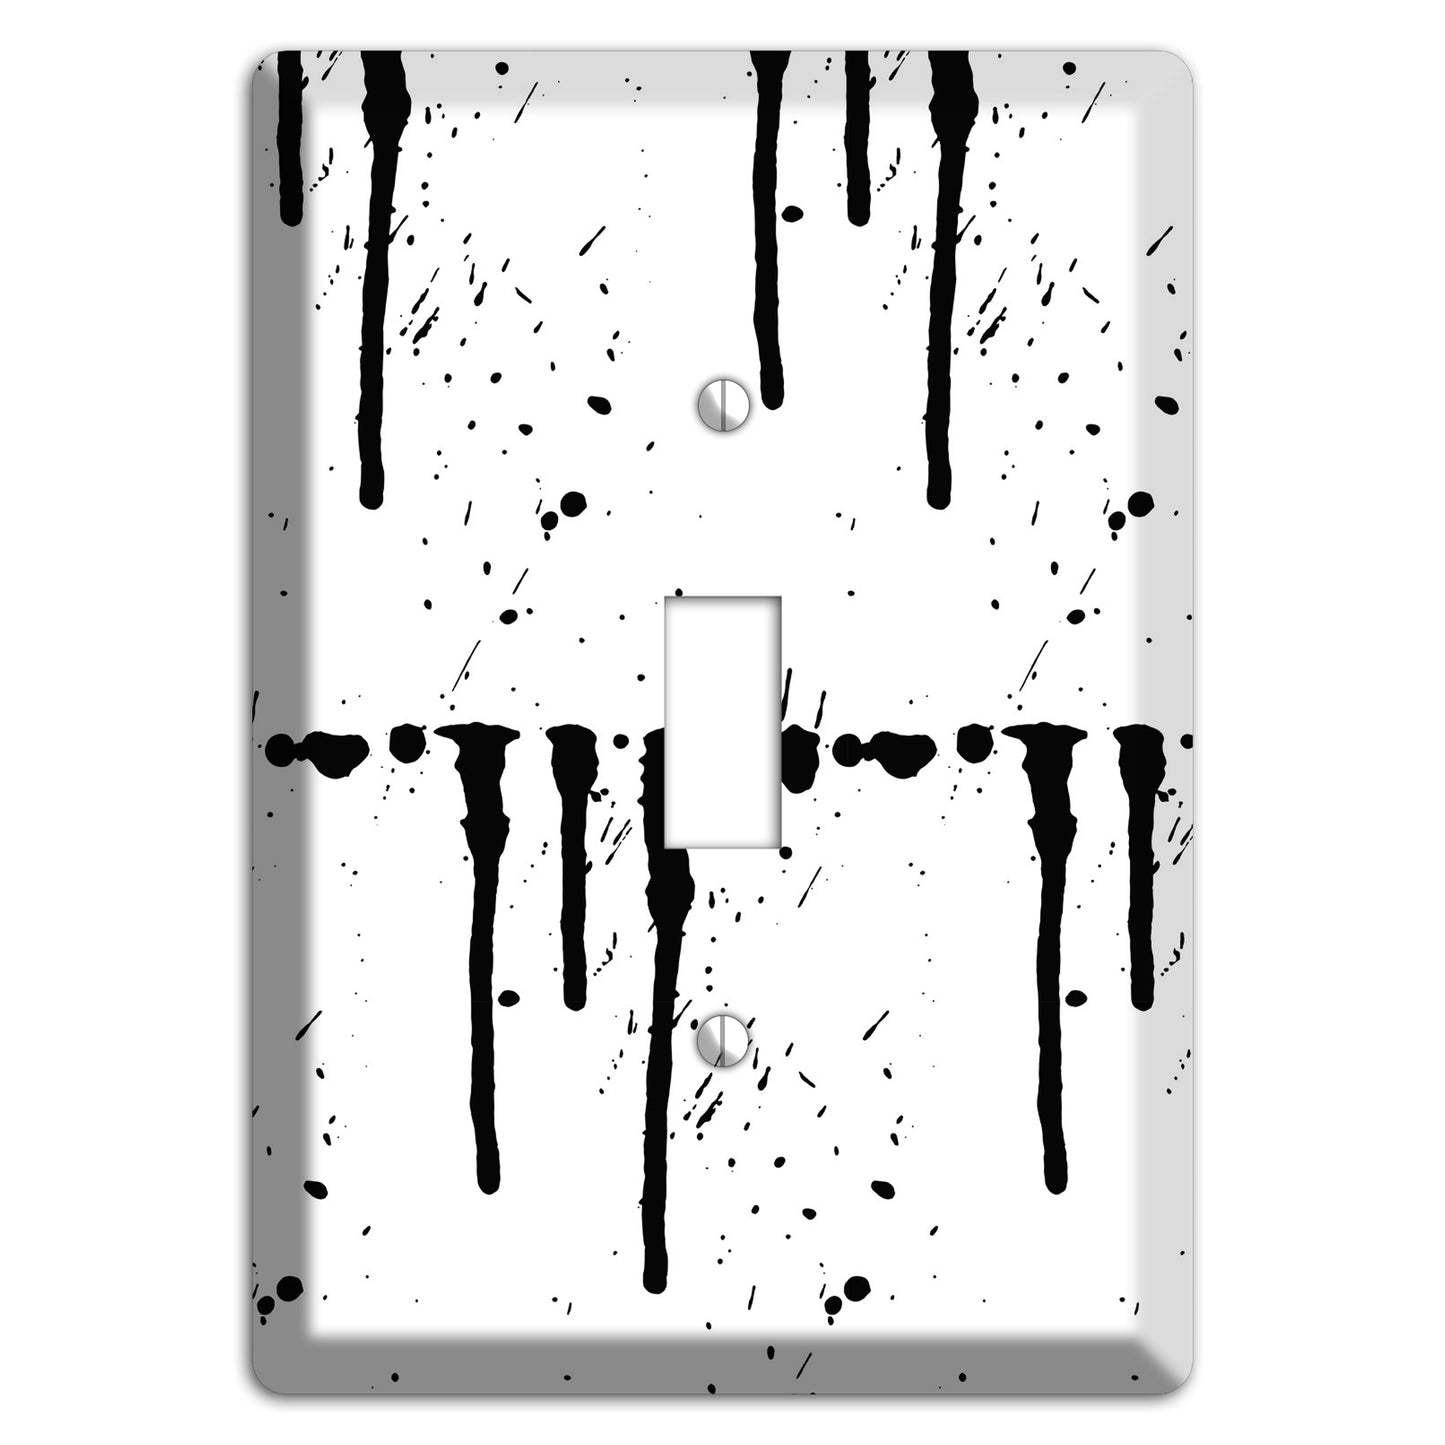 Ink Drips 2 Cover Plates